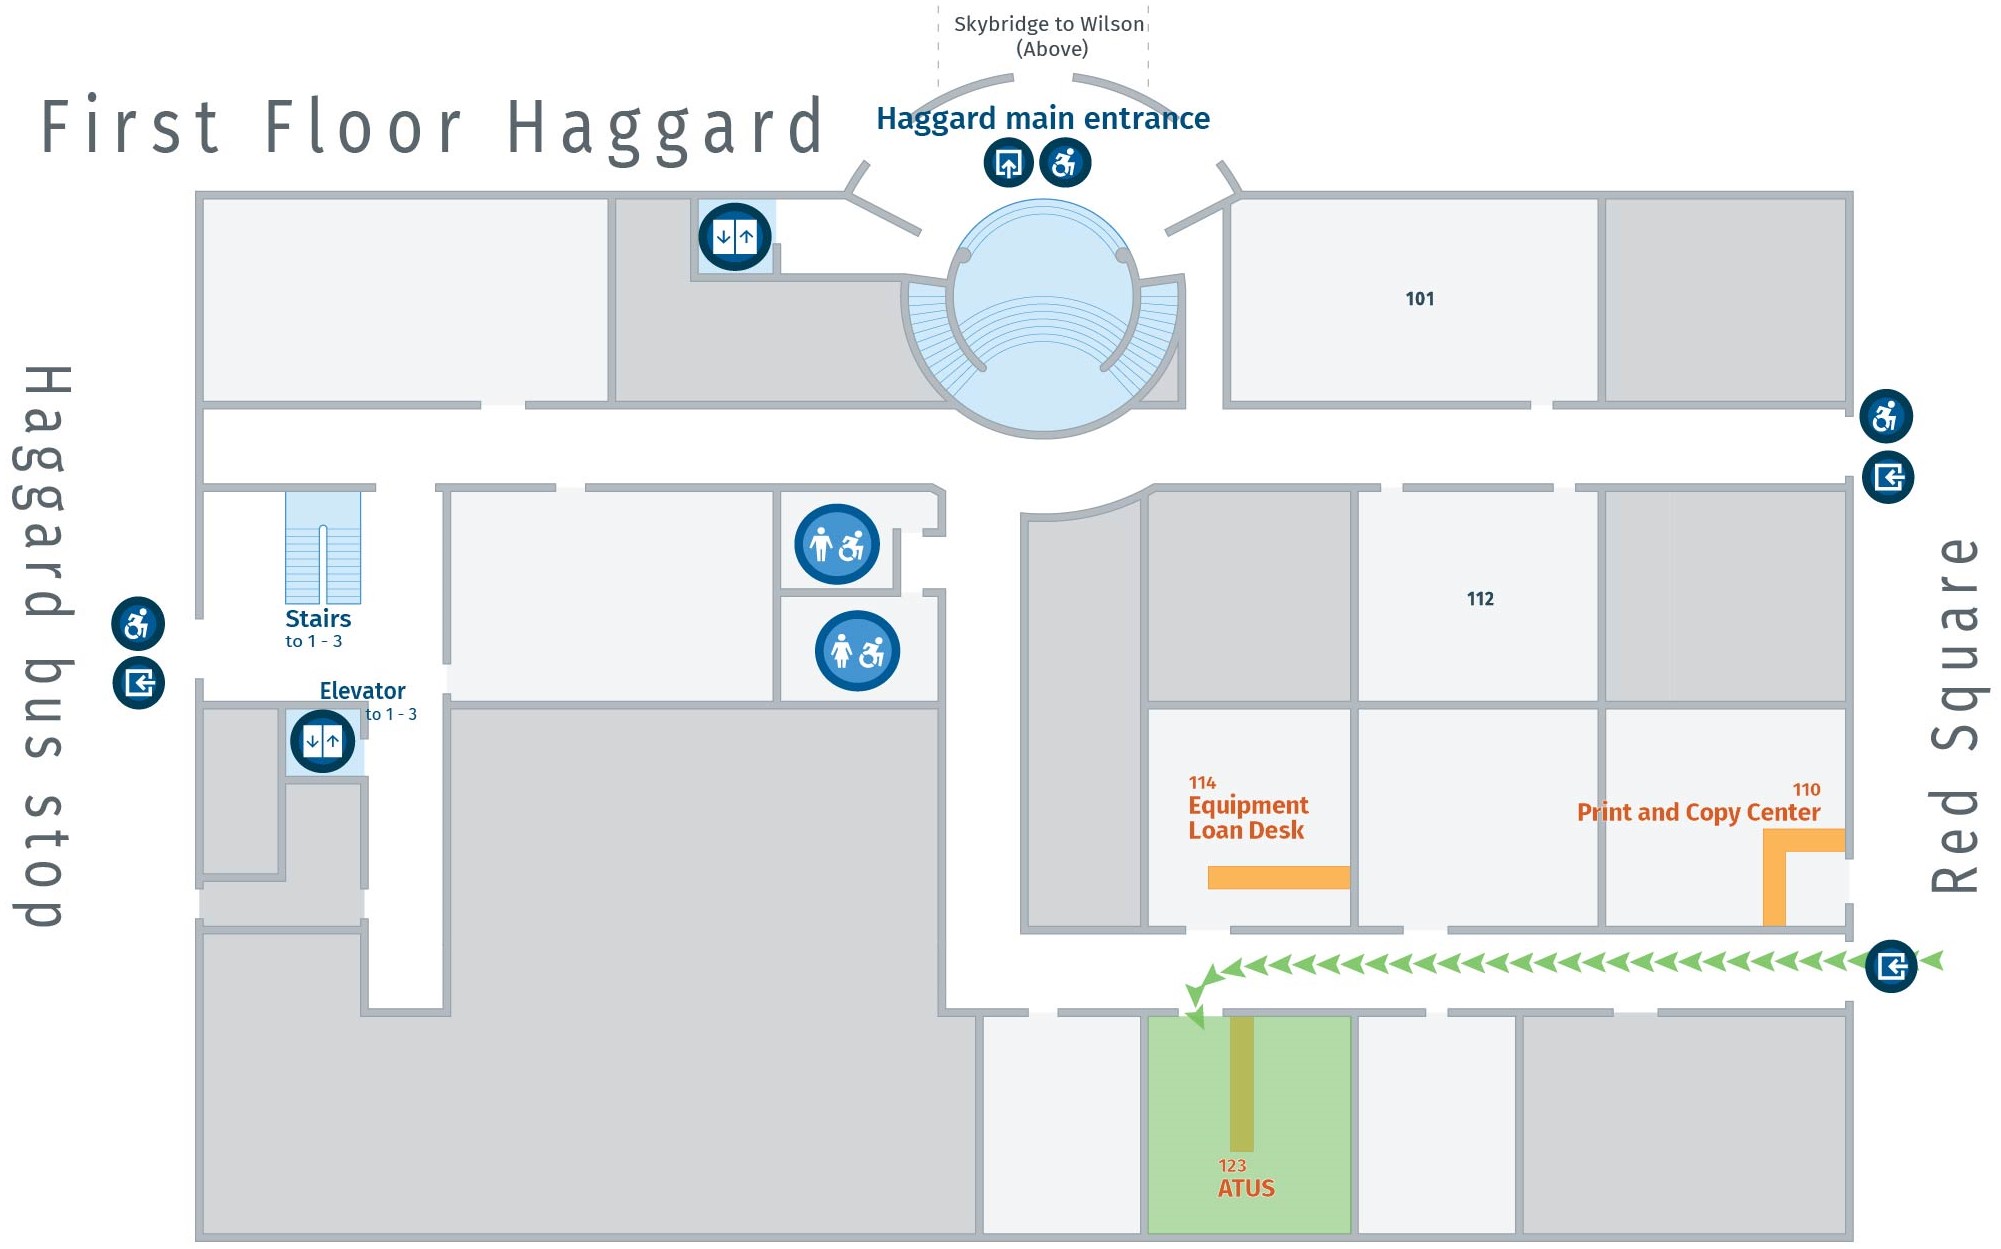 Floor plan, first floor of Haggard with path to ATUS.